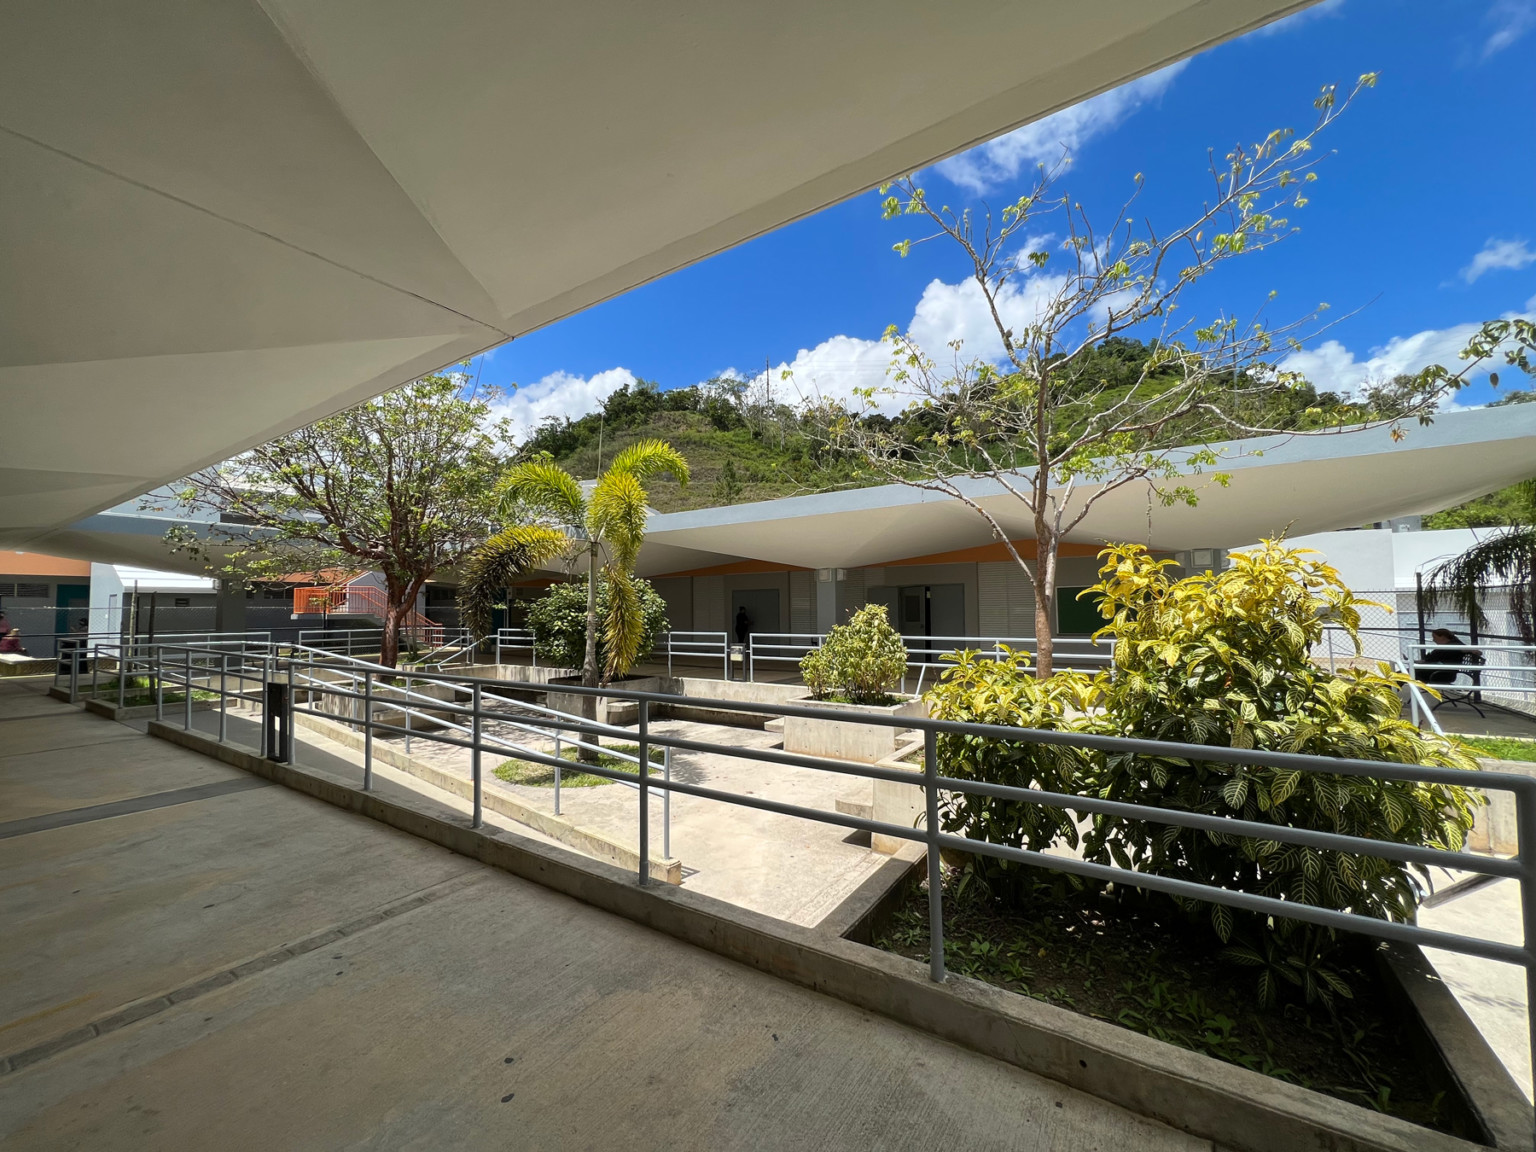 Puerto Rican Elementary School Urbana Violeta Reyes interior courtyard with covered walkways in front of large hills